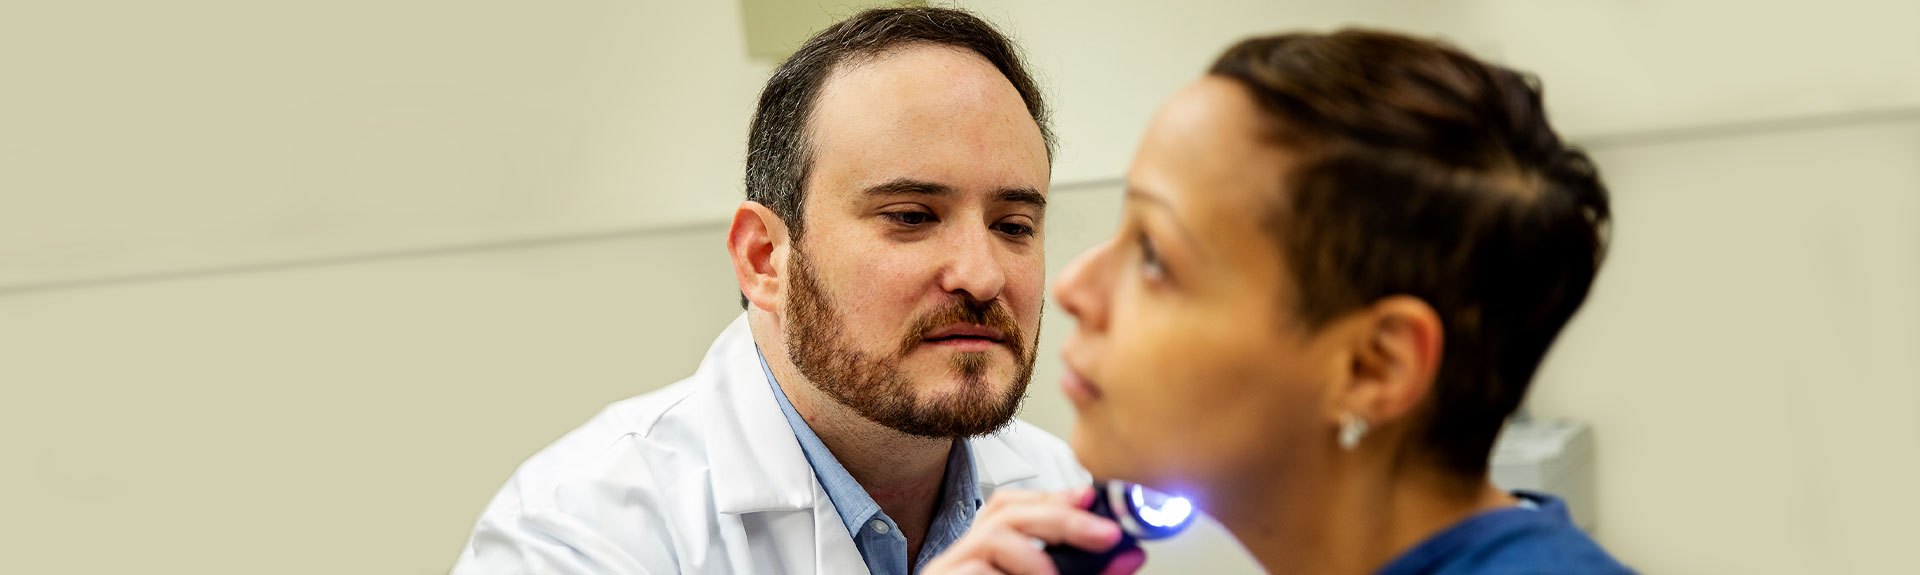 Male physician examining a female patient using a dermatoscope